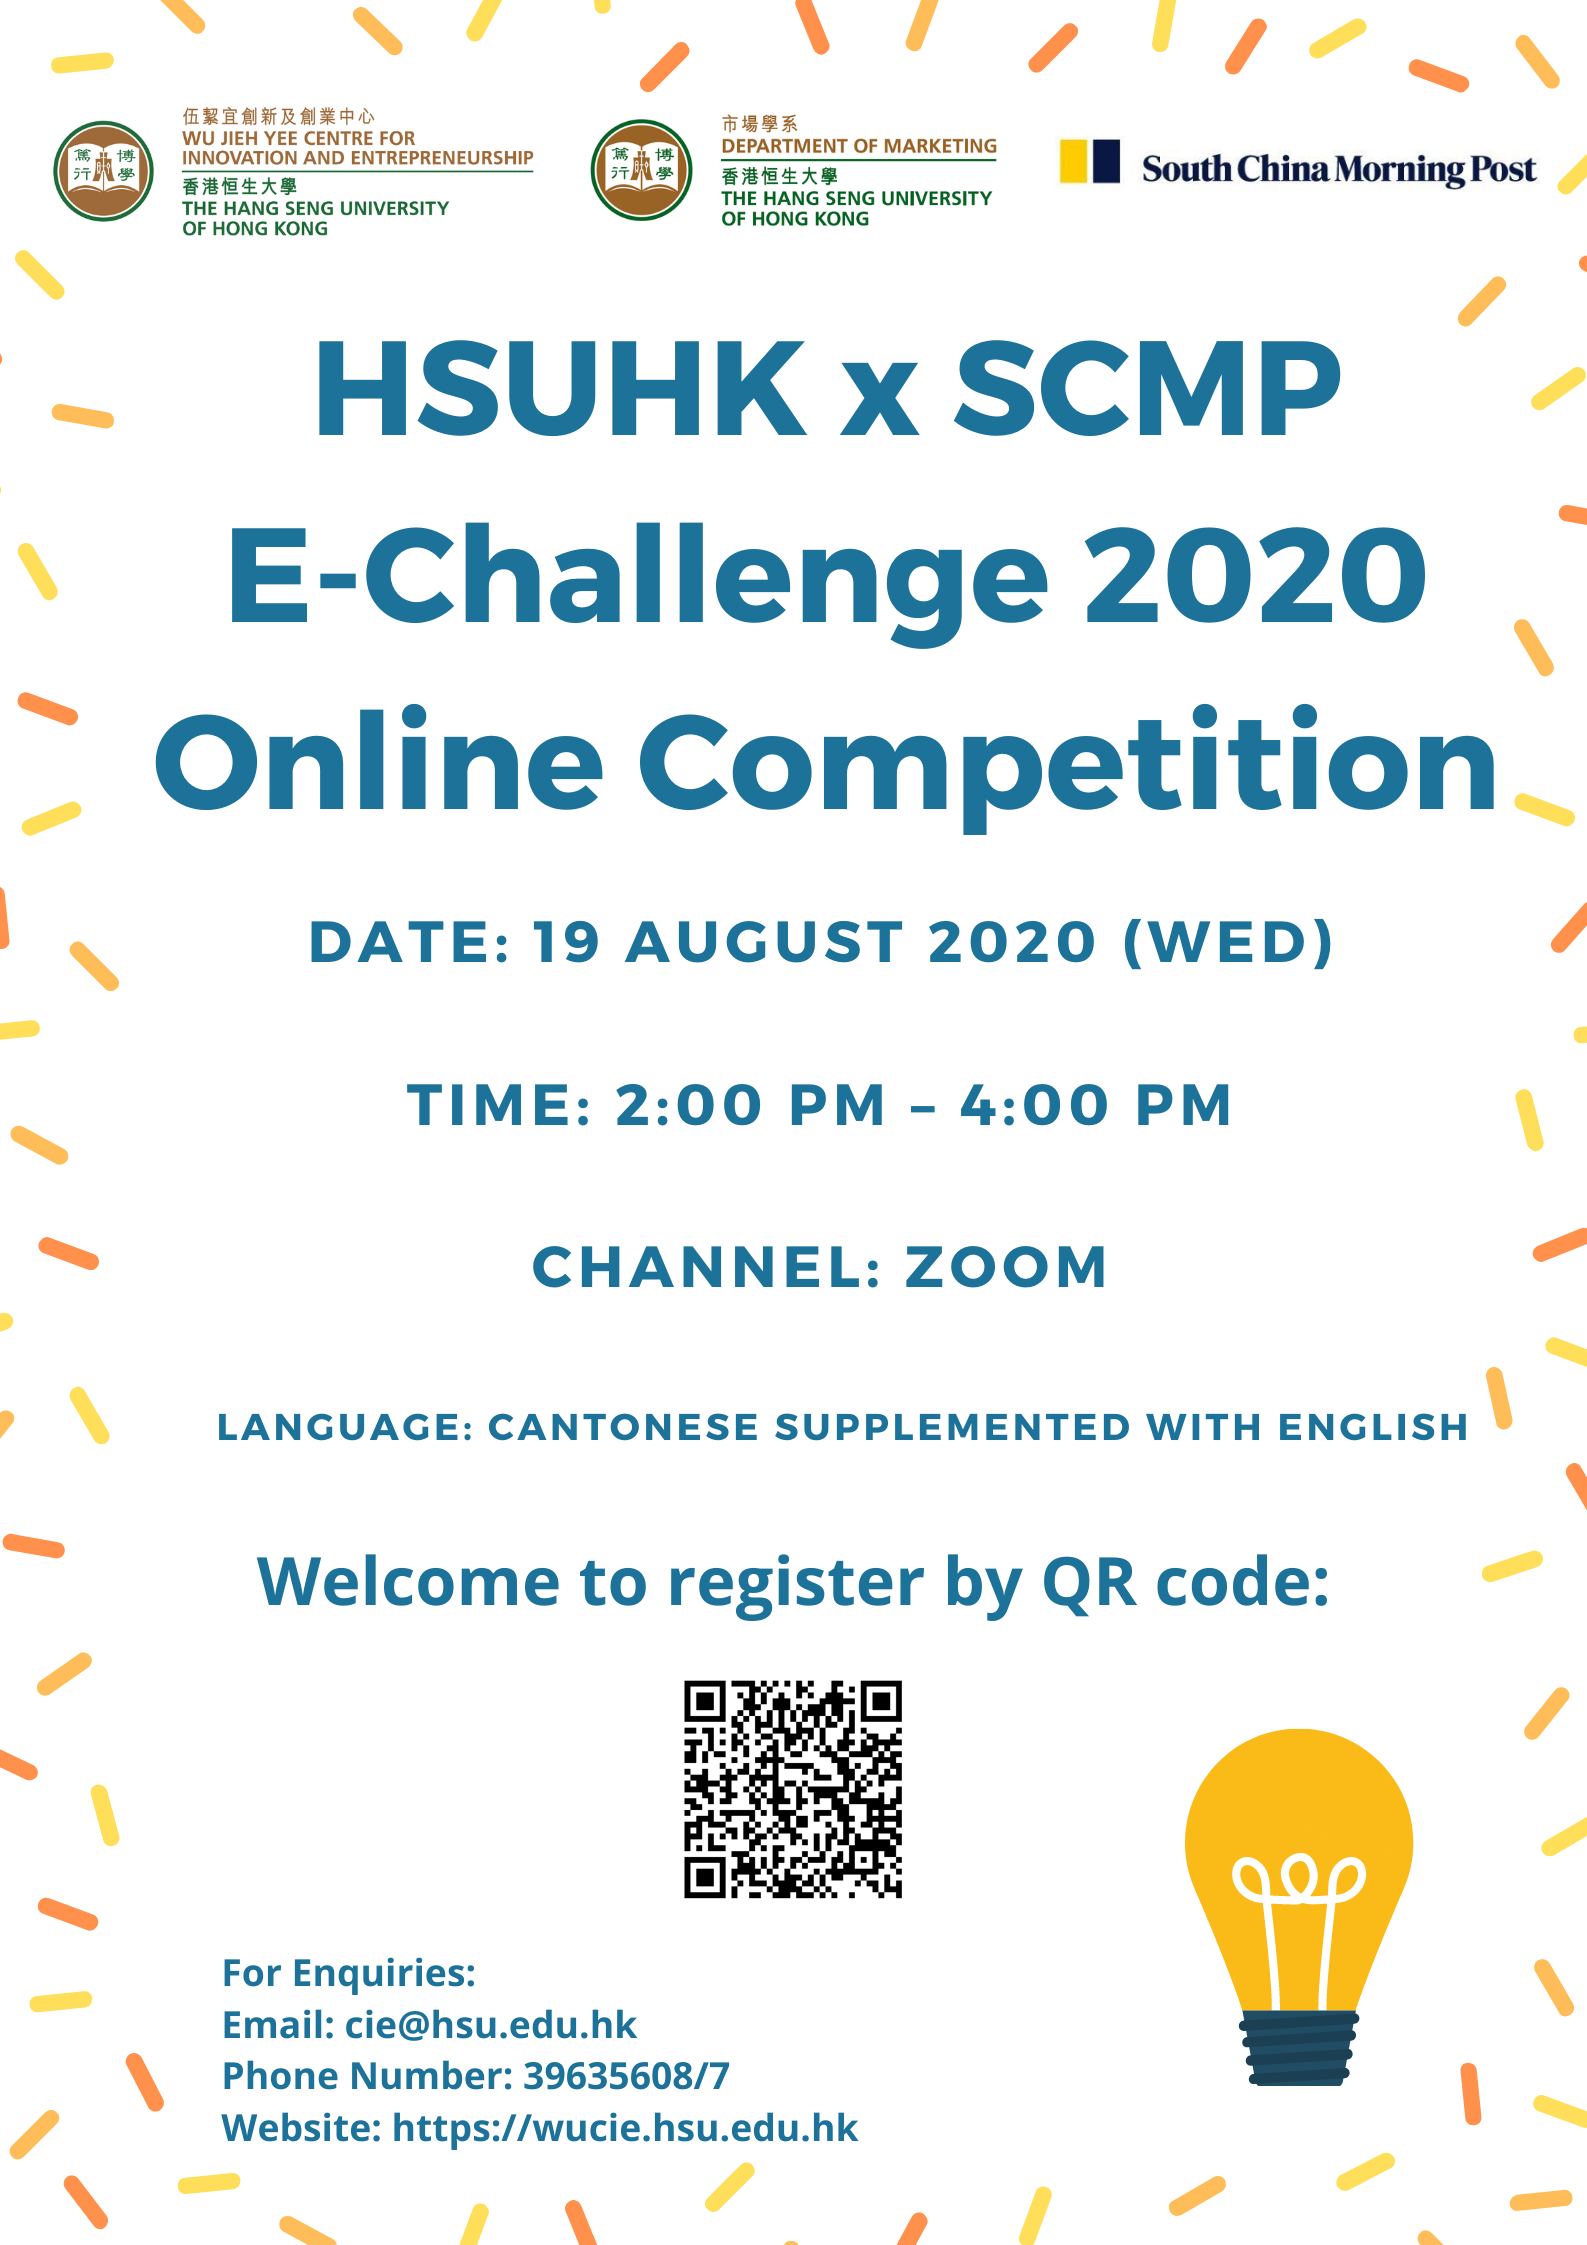 Poster - HSUHK x SCMP E-Challenge 2020 Online Competition